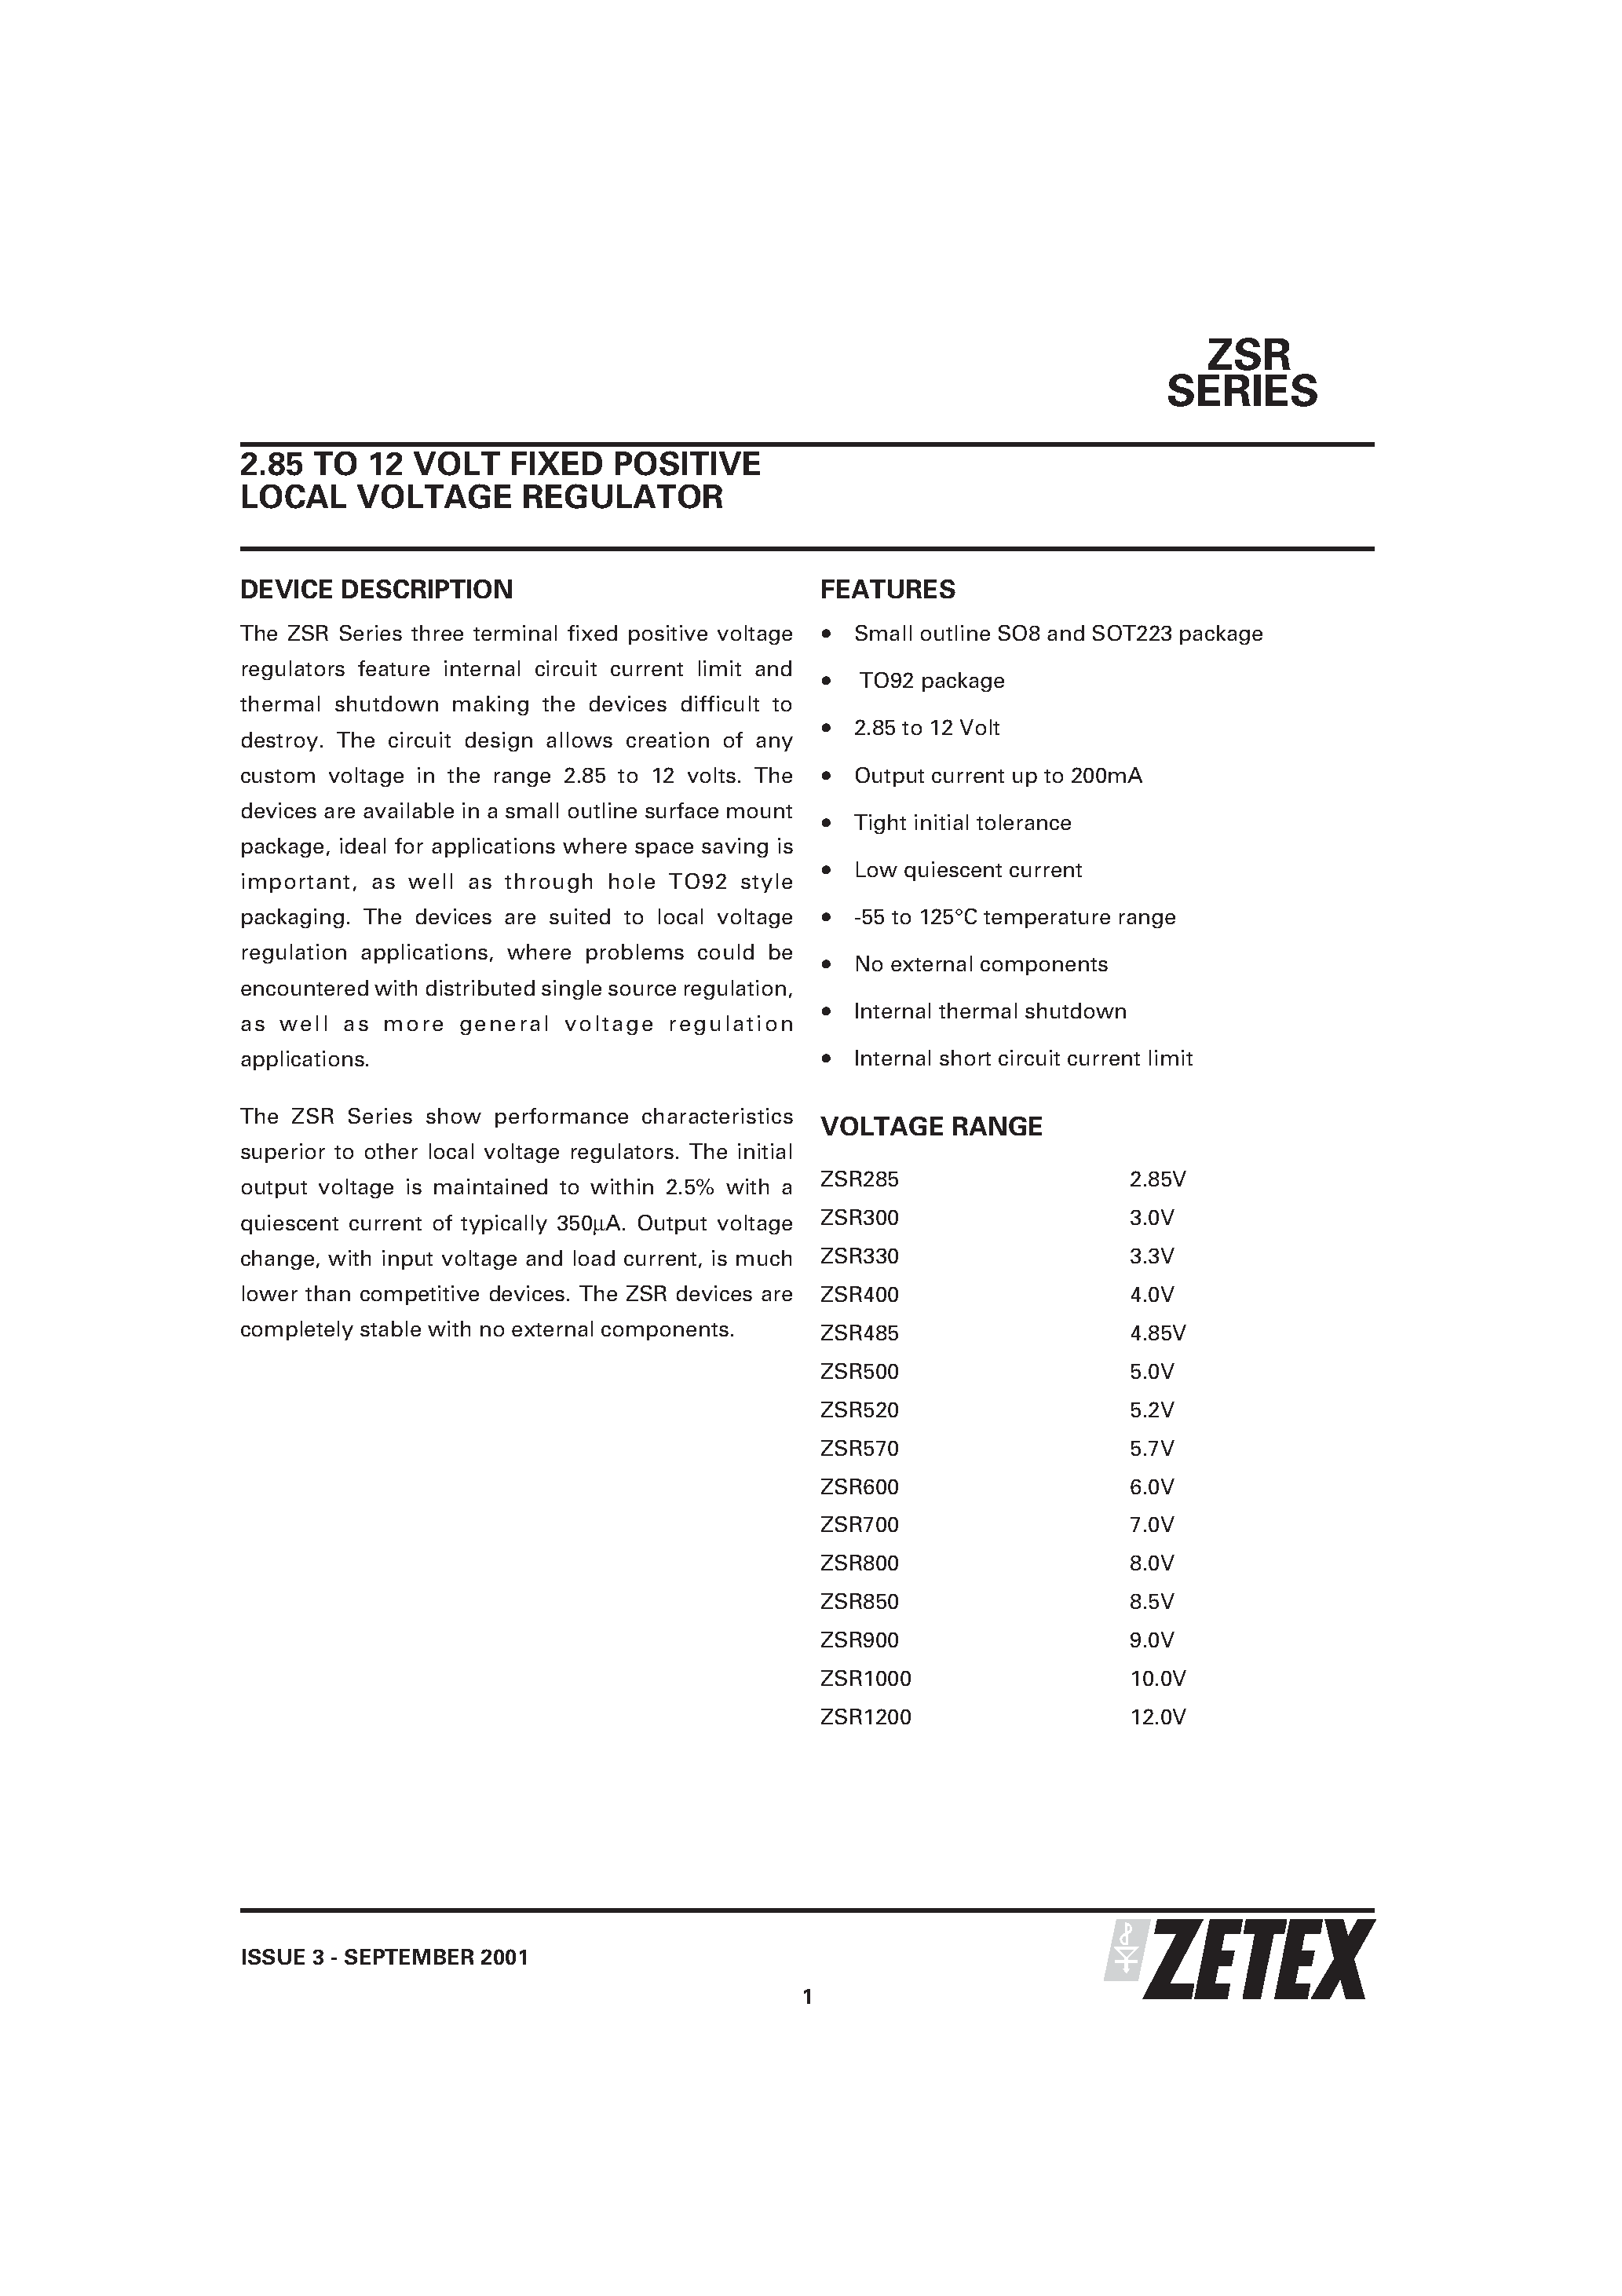 Datasheet ZSR600N8 - 2.85 TO 12 VOLT FIXED POSITIVE LOCAL VOLTAGE REGULATOR page 1